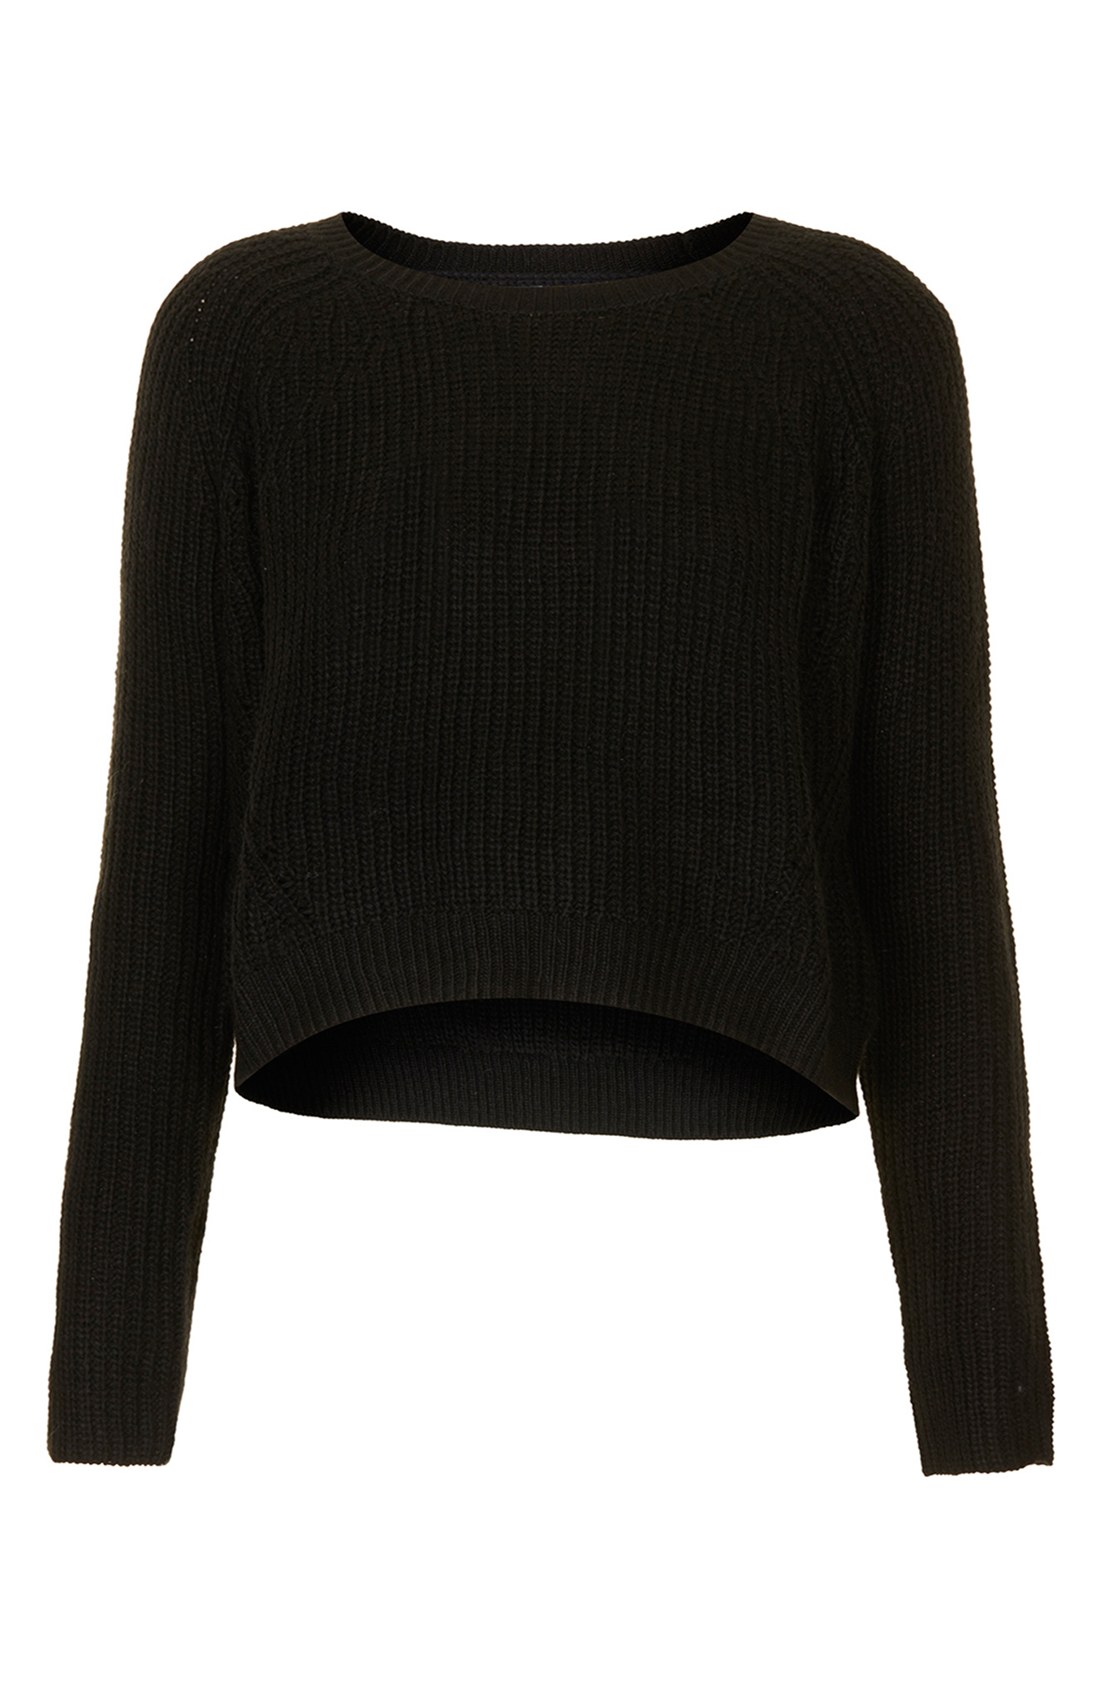 Topshop Ribbed Crop Sweater in Black | Lyst